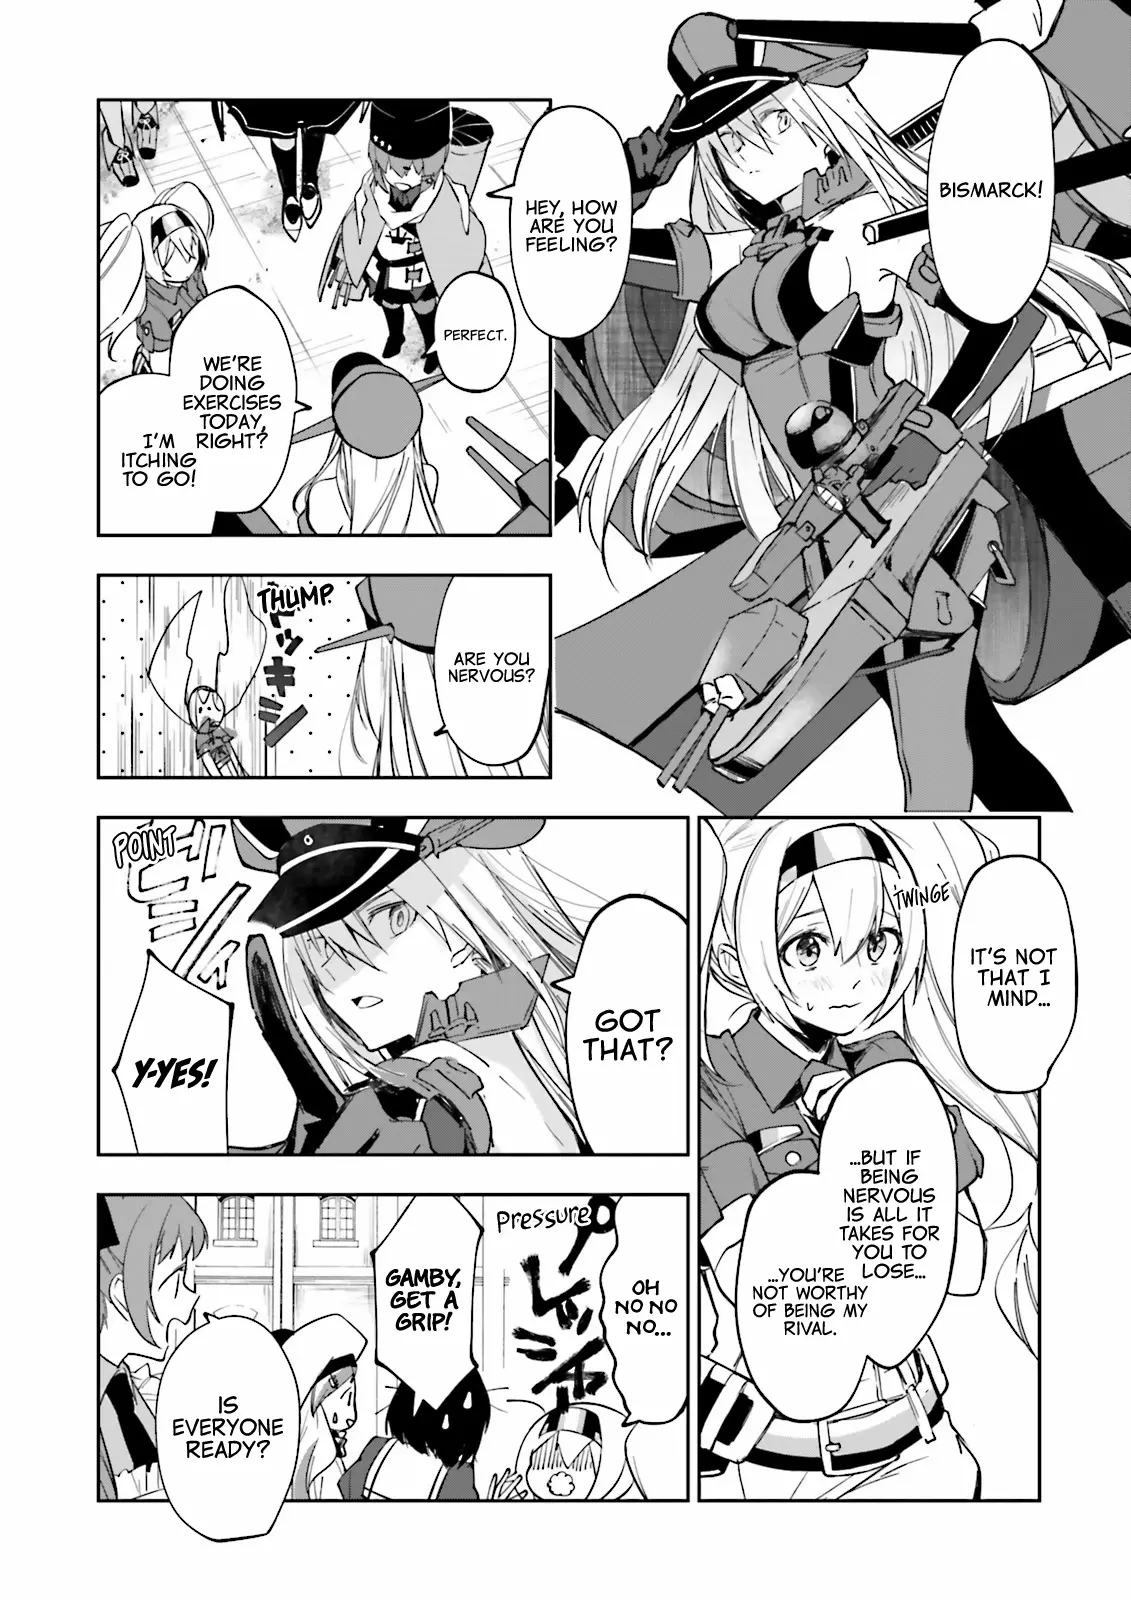 Kantai Collection -Kancolle- Tonight, Another "salute"! - 20 page 4-04672a0f